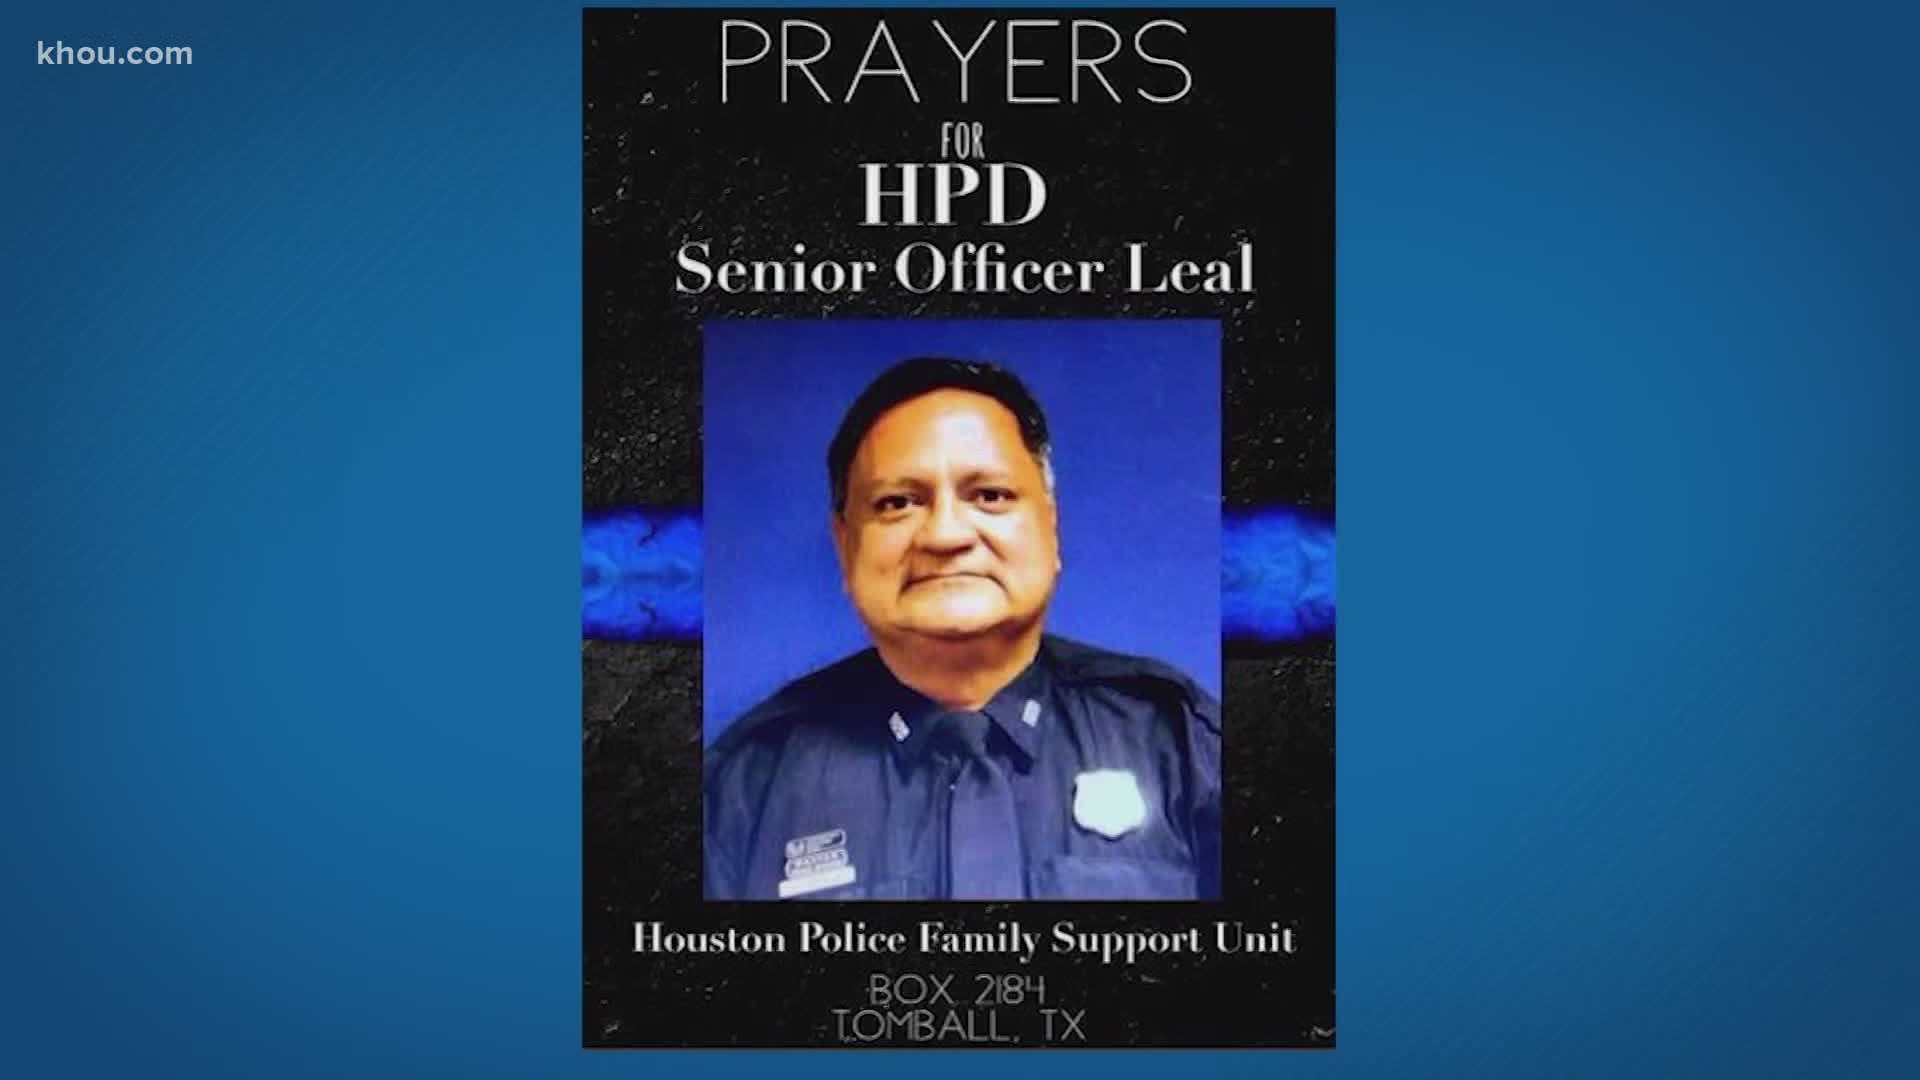 HPD Officer Earnest Leal has been in the hospital for several days now fighting for his life.